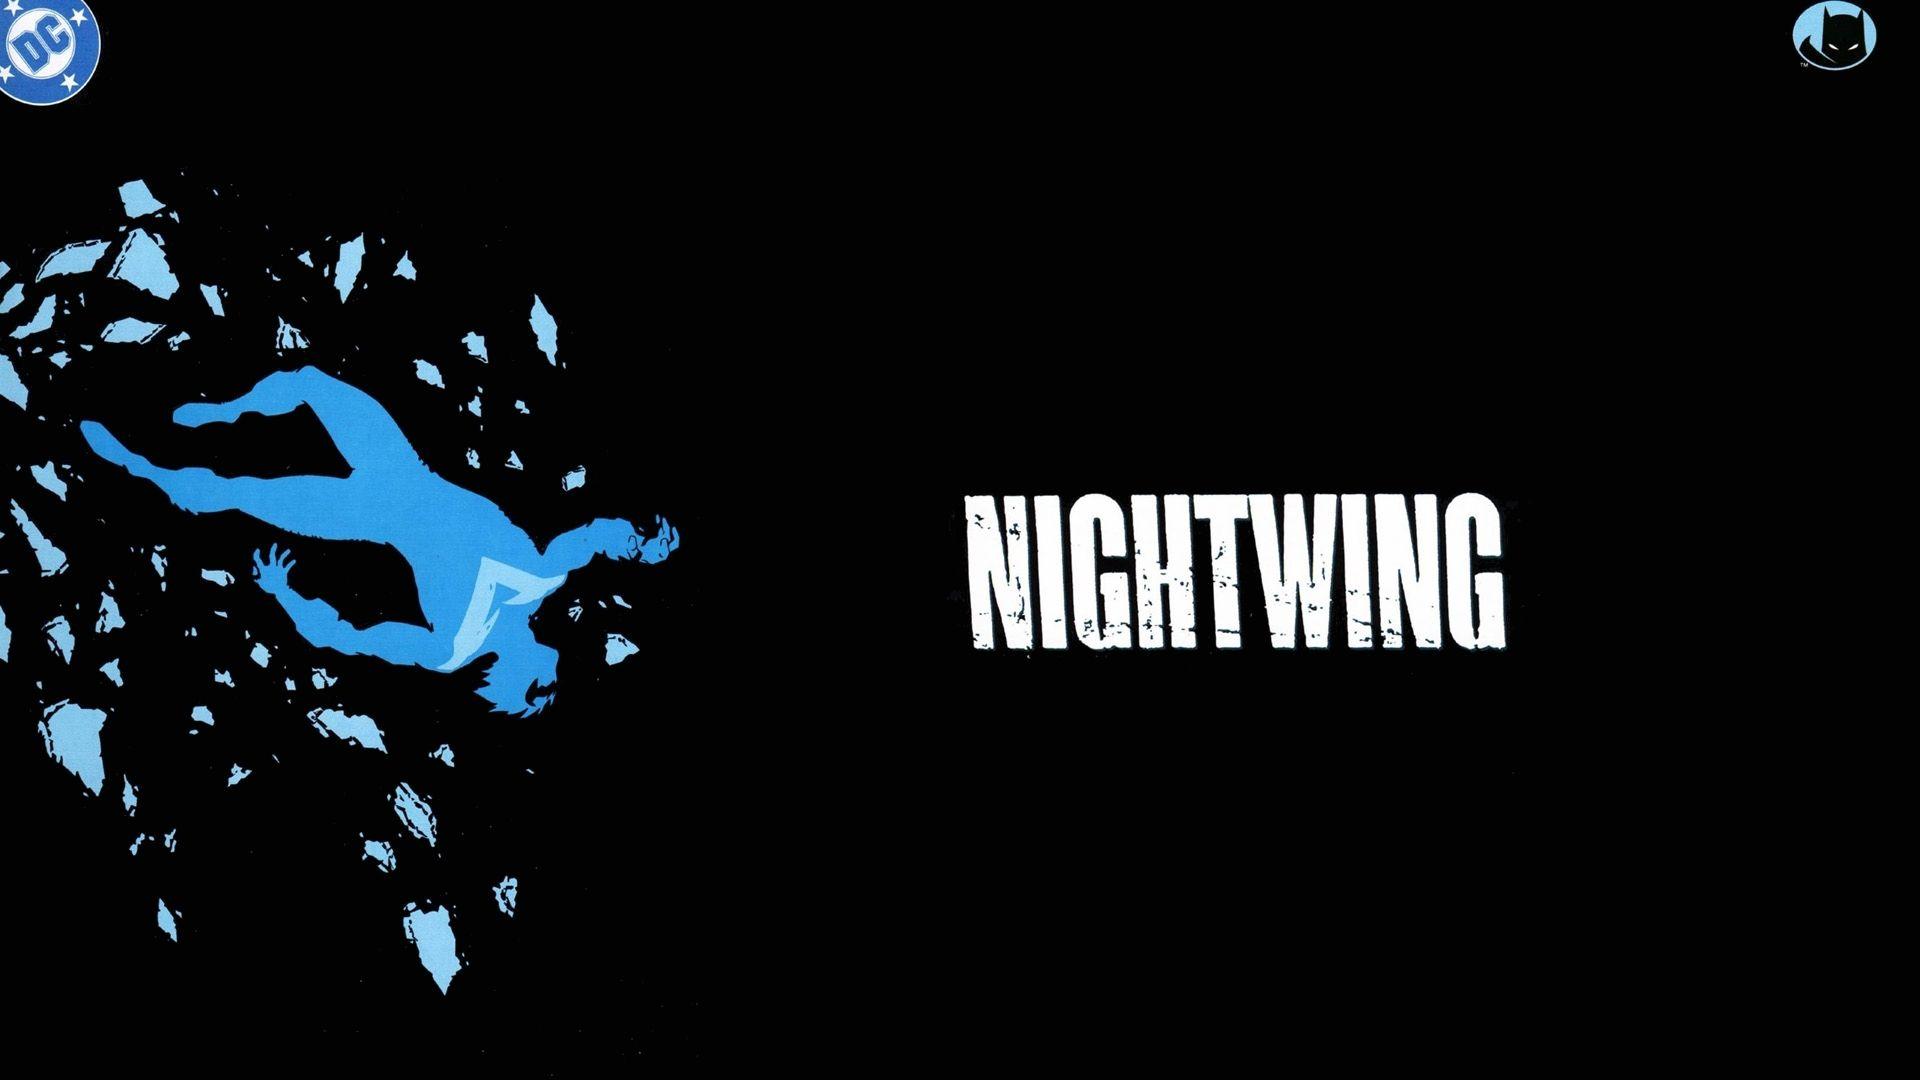 Wallpaper For > Nightwing Wallpaper 1920x1080